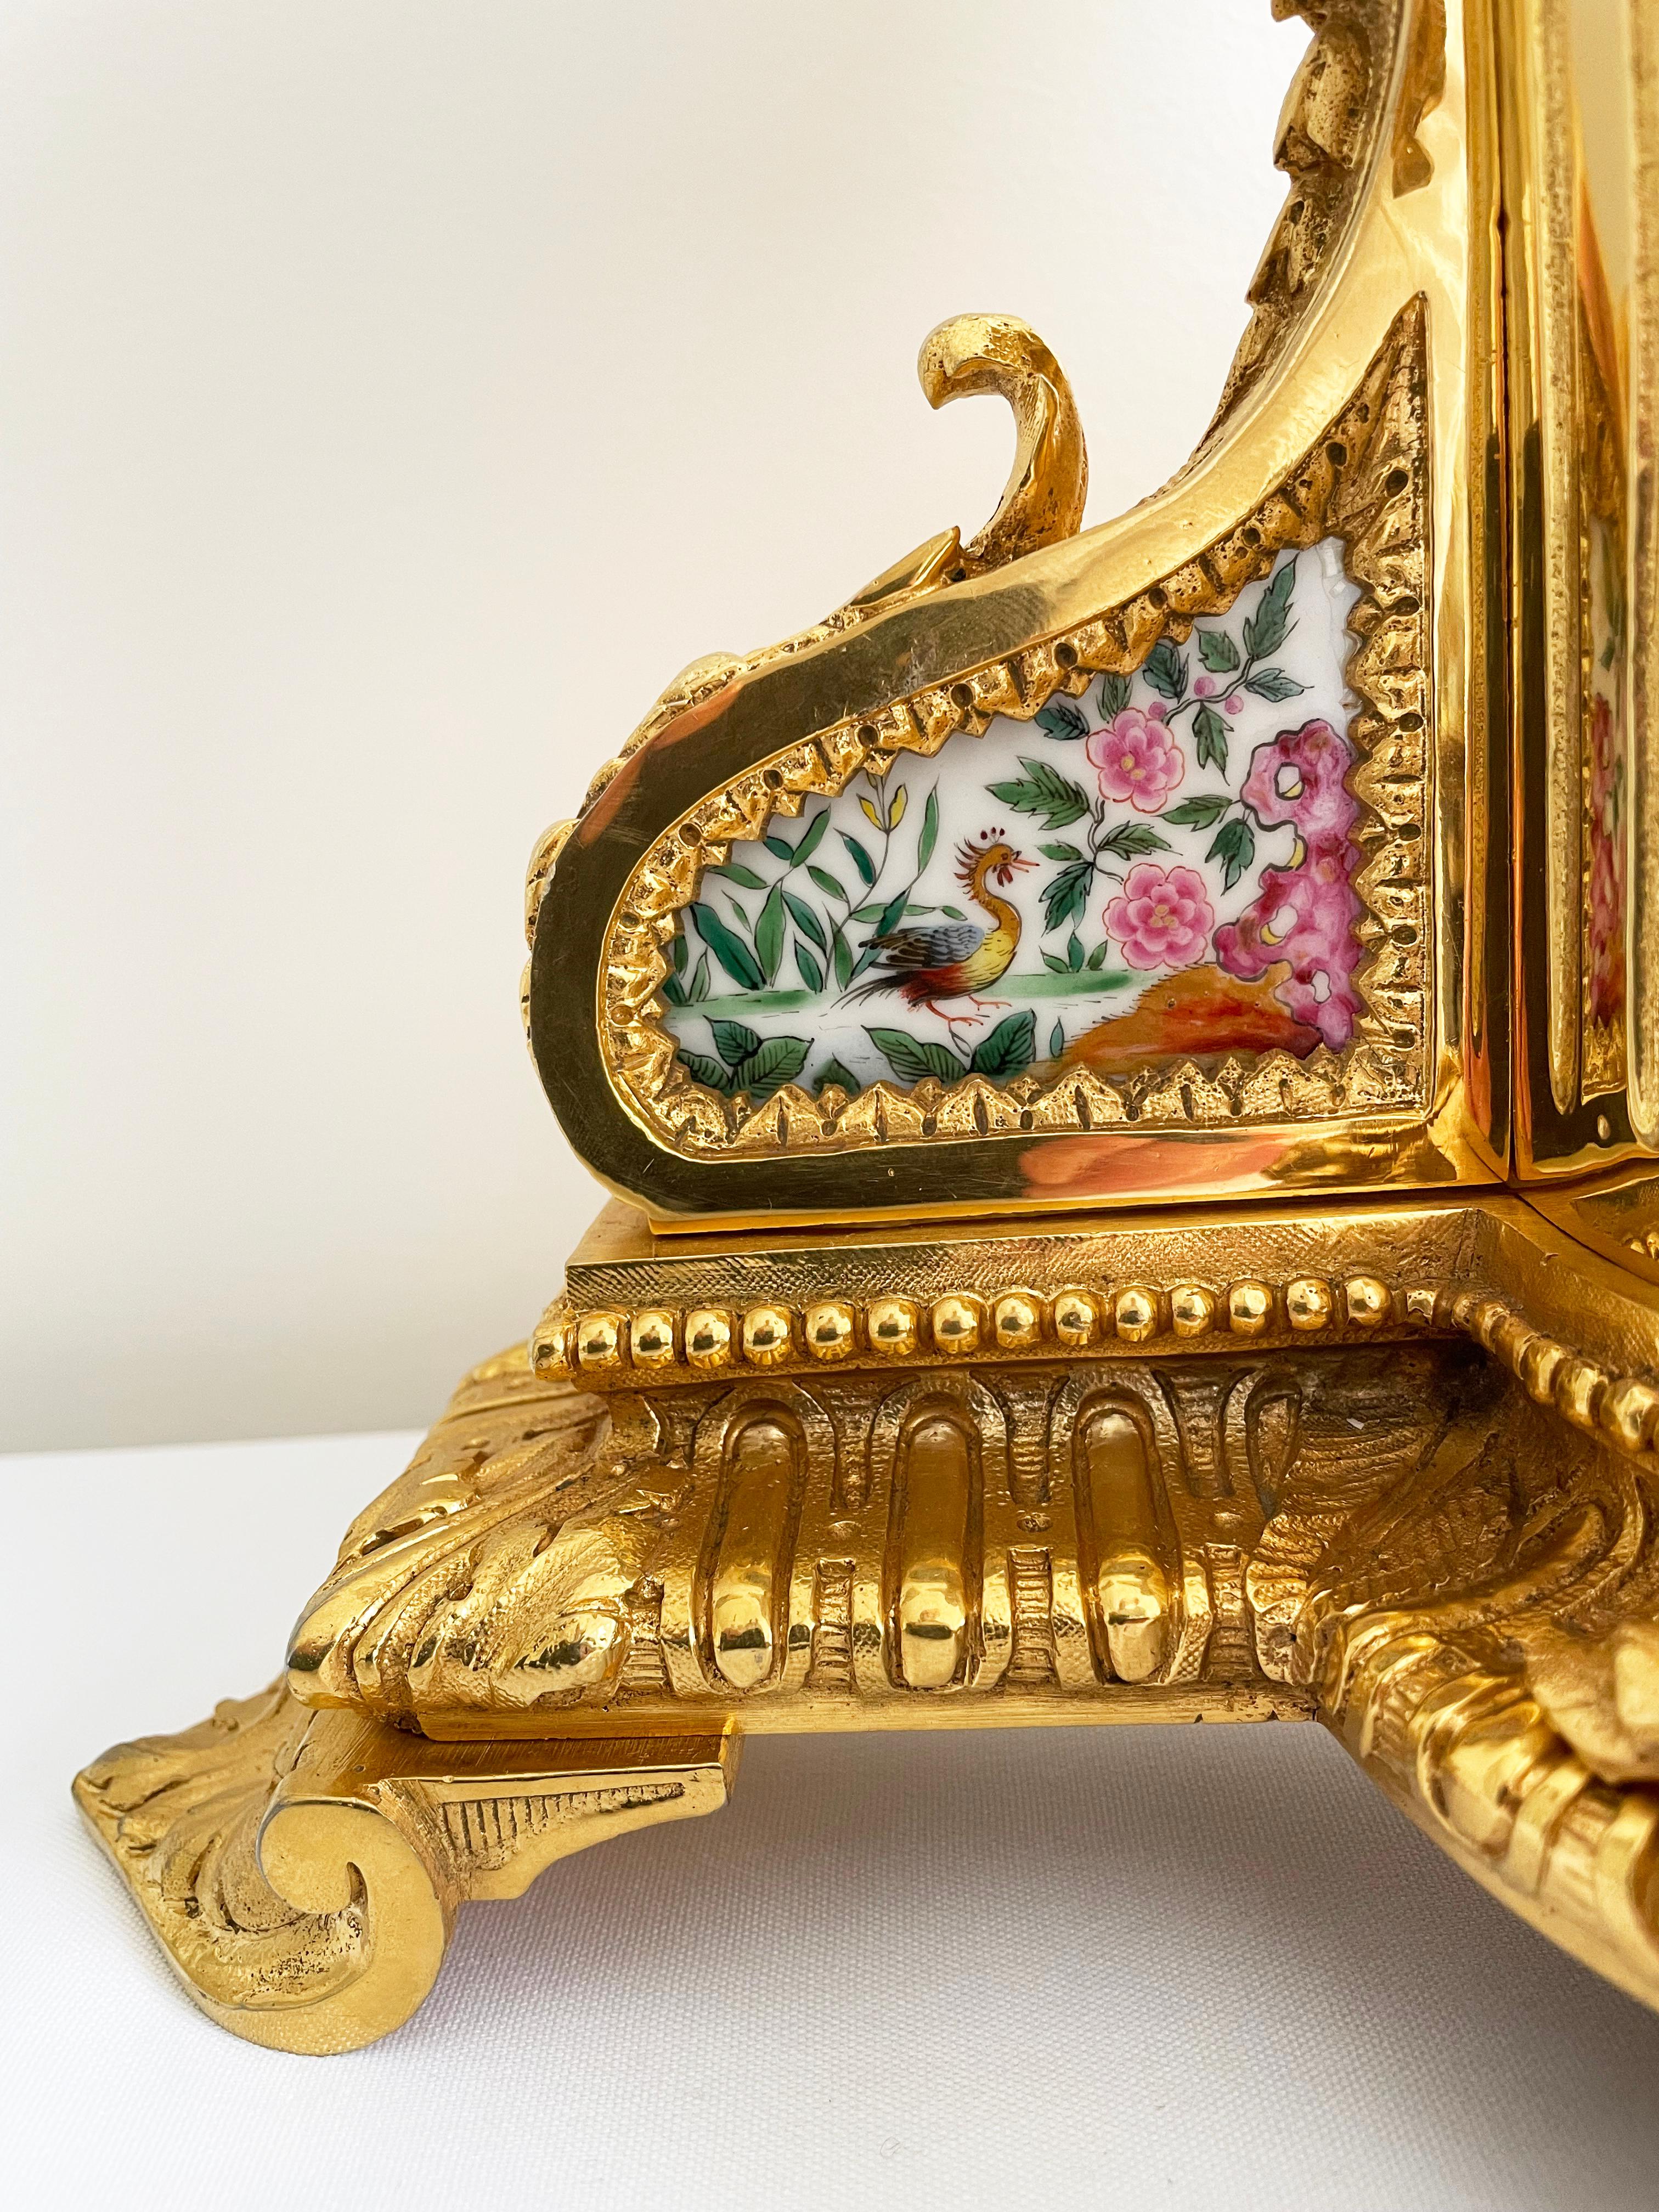 French Gilt Bronze And Porcelain Chinoiserie Themed Mantel Clock, 19th Century For Sale 2